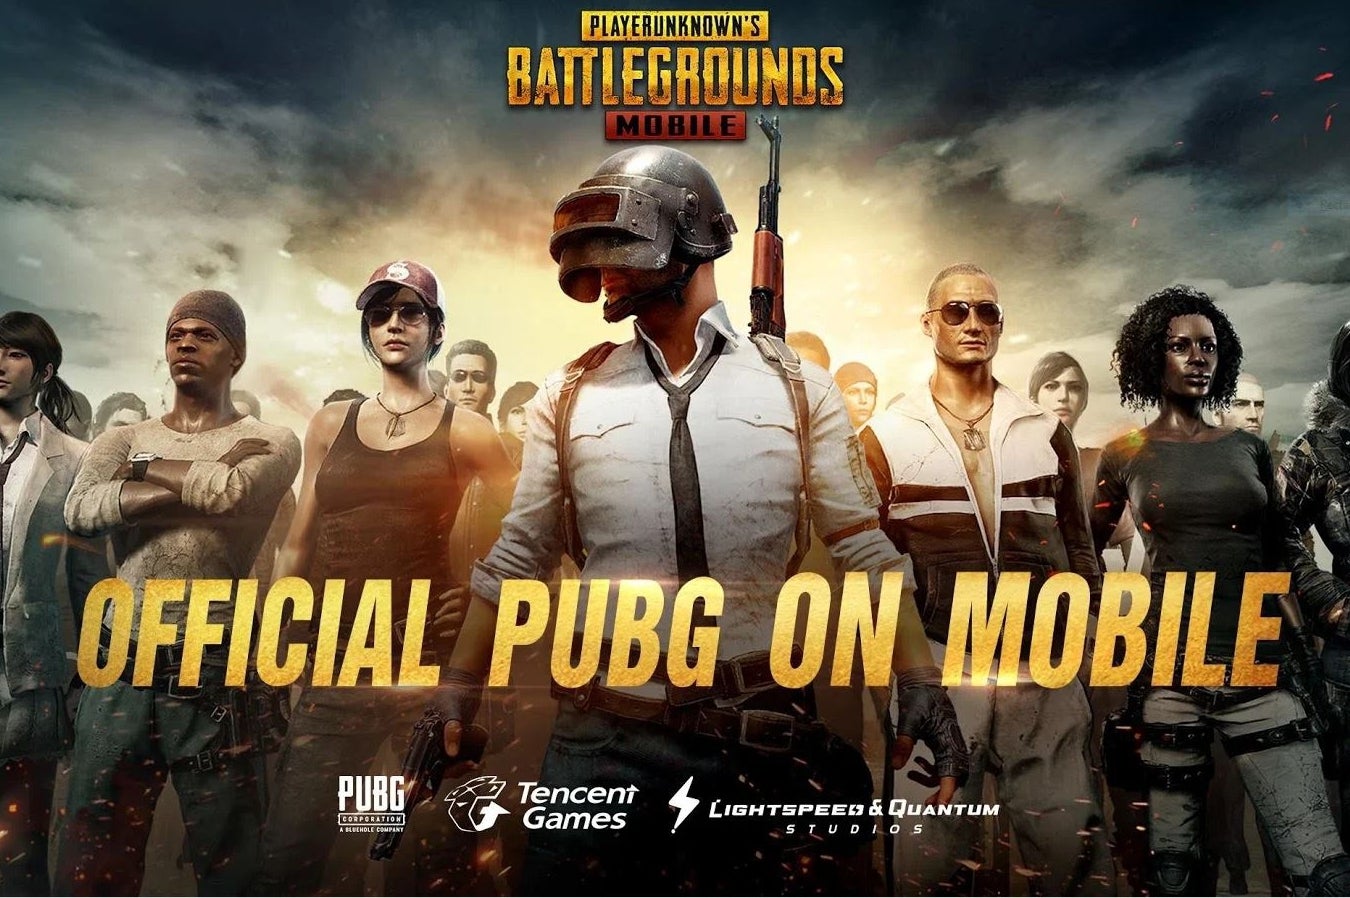 Image for PUBG Mobile's new anti-cheat system has "already seen a 50% decrease in cheating" during testing